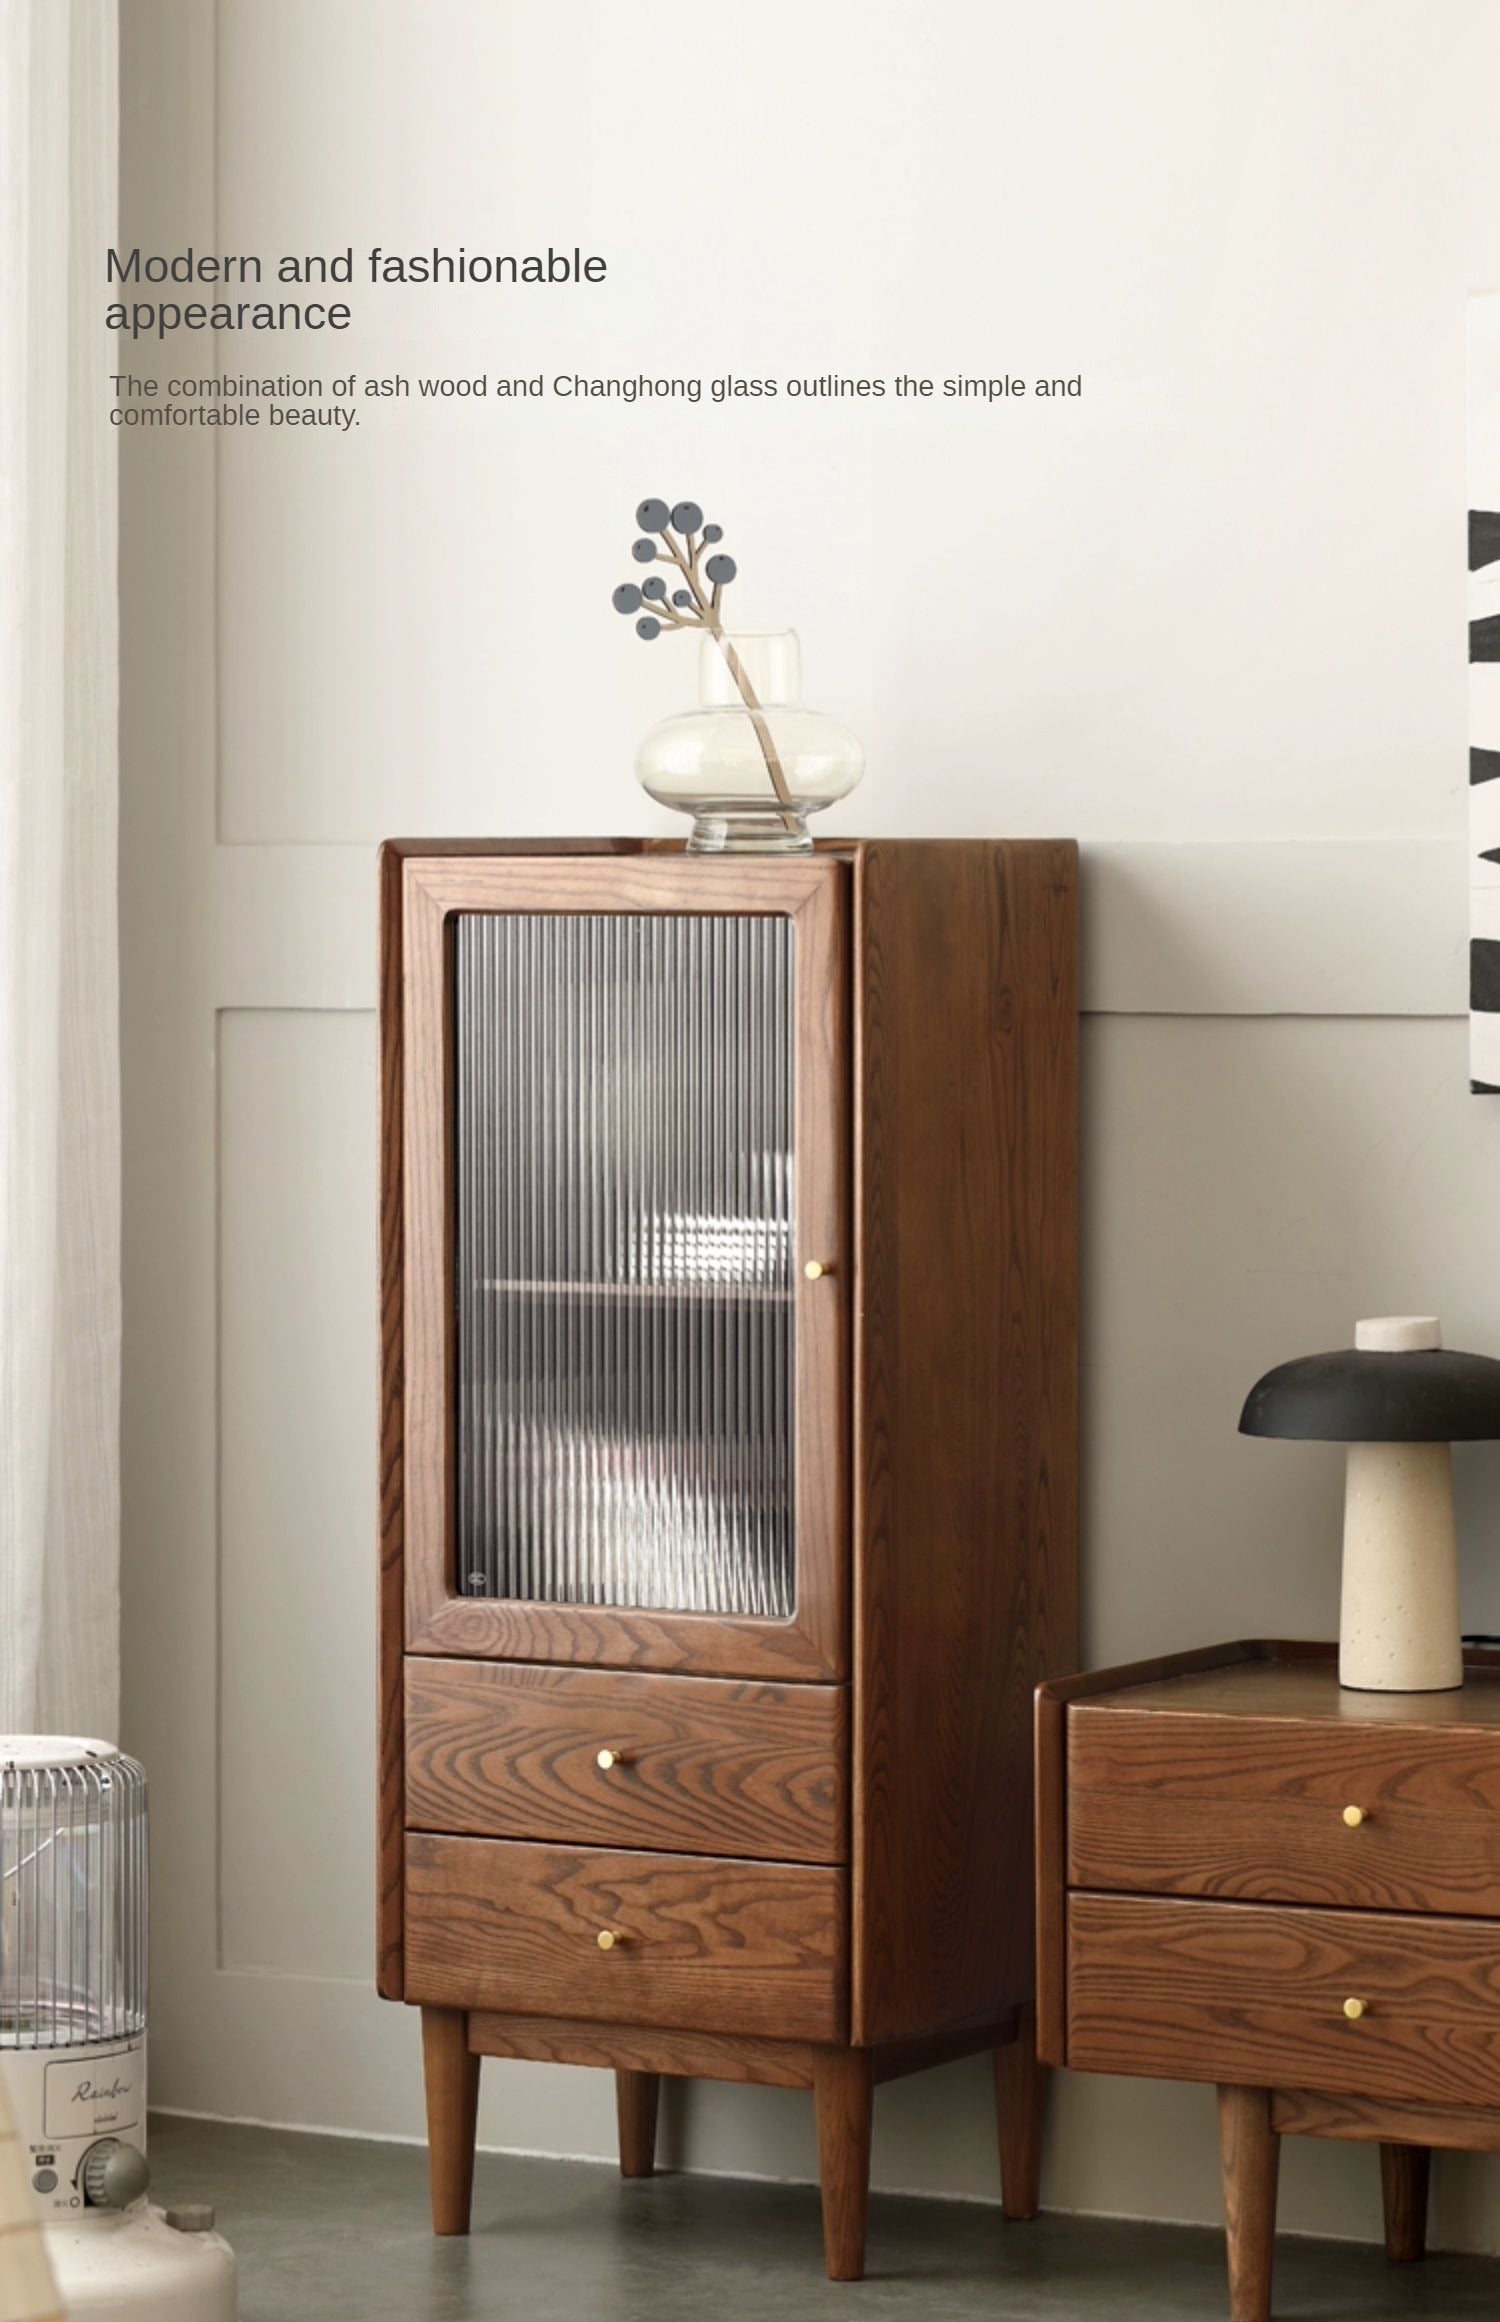 Ash solid wood narrow side cabinet -